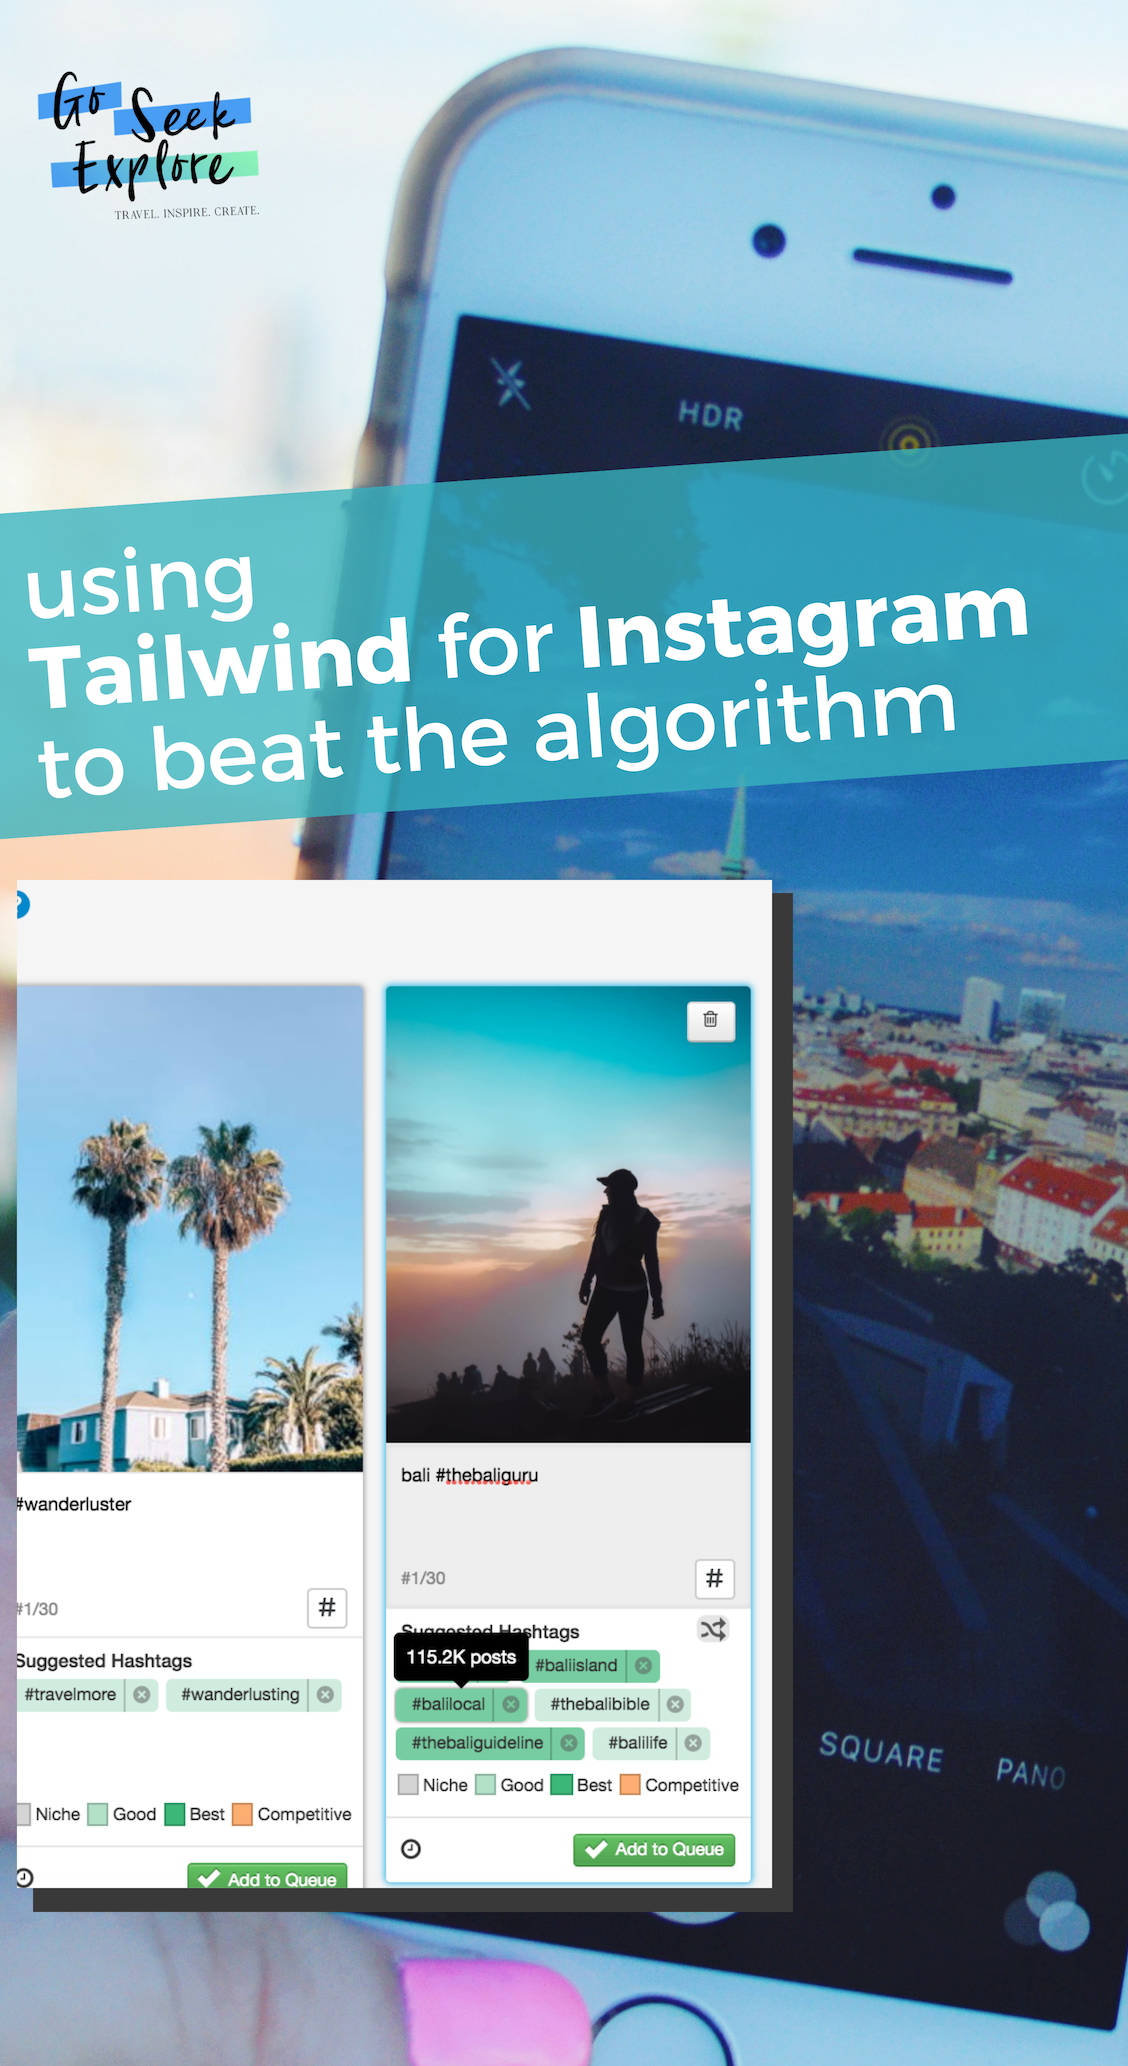 How to Get Verified on Instagram: 7 Easy Steps - Tailwind Blog